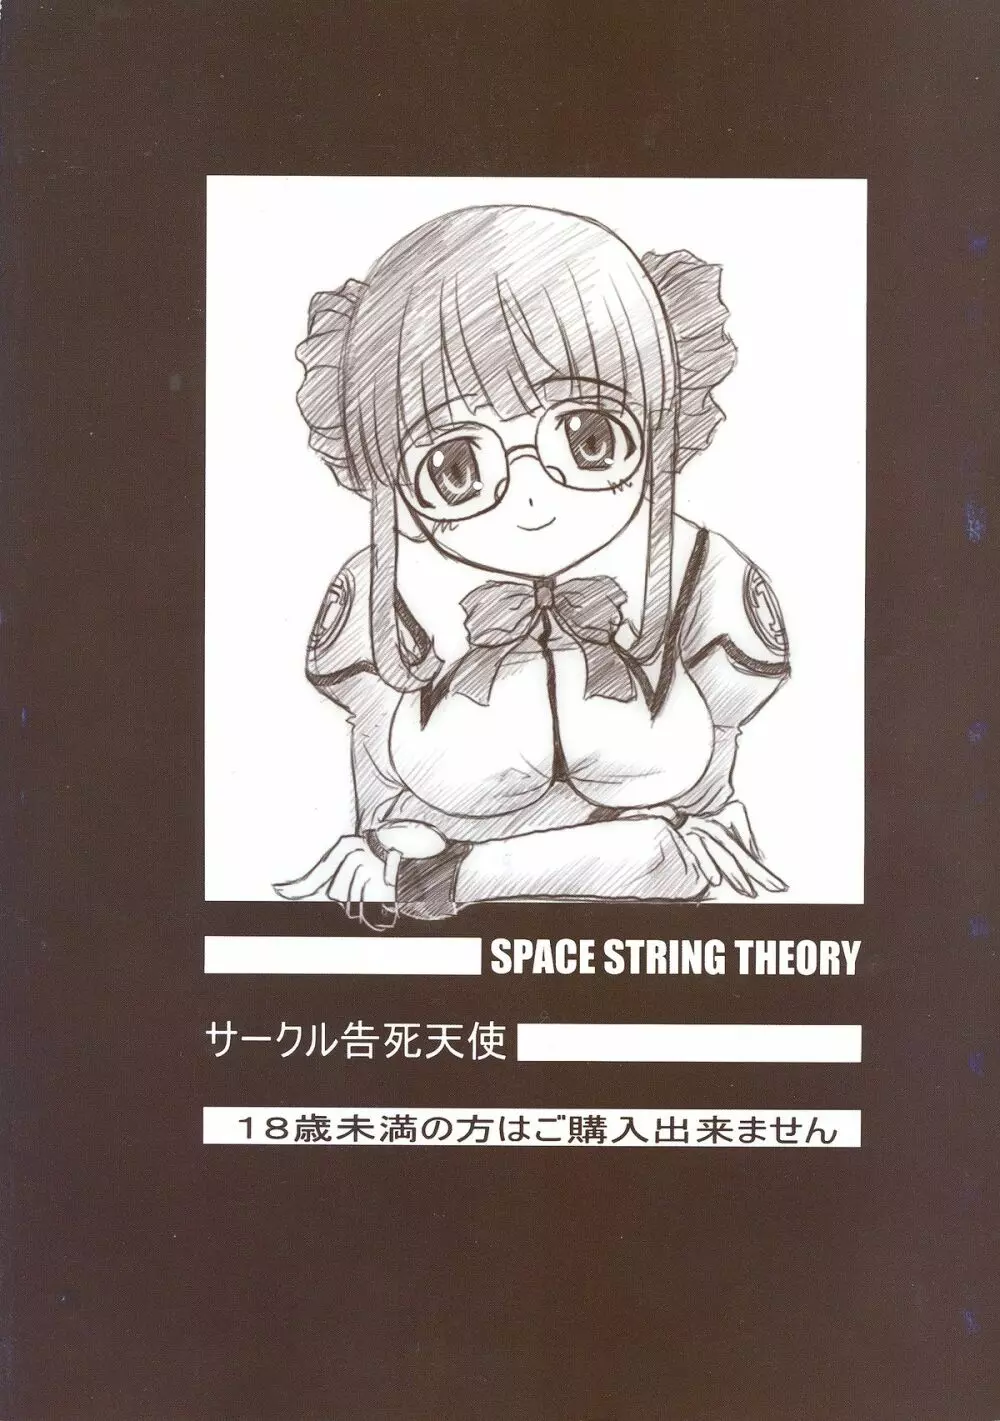 SPACE STRING THEORY 2ページ